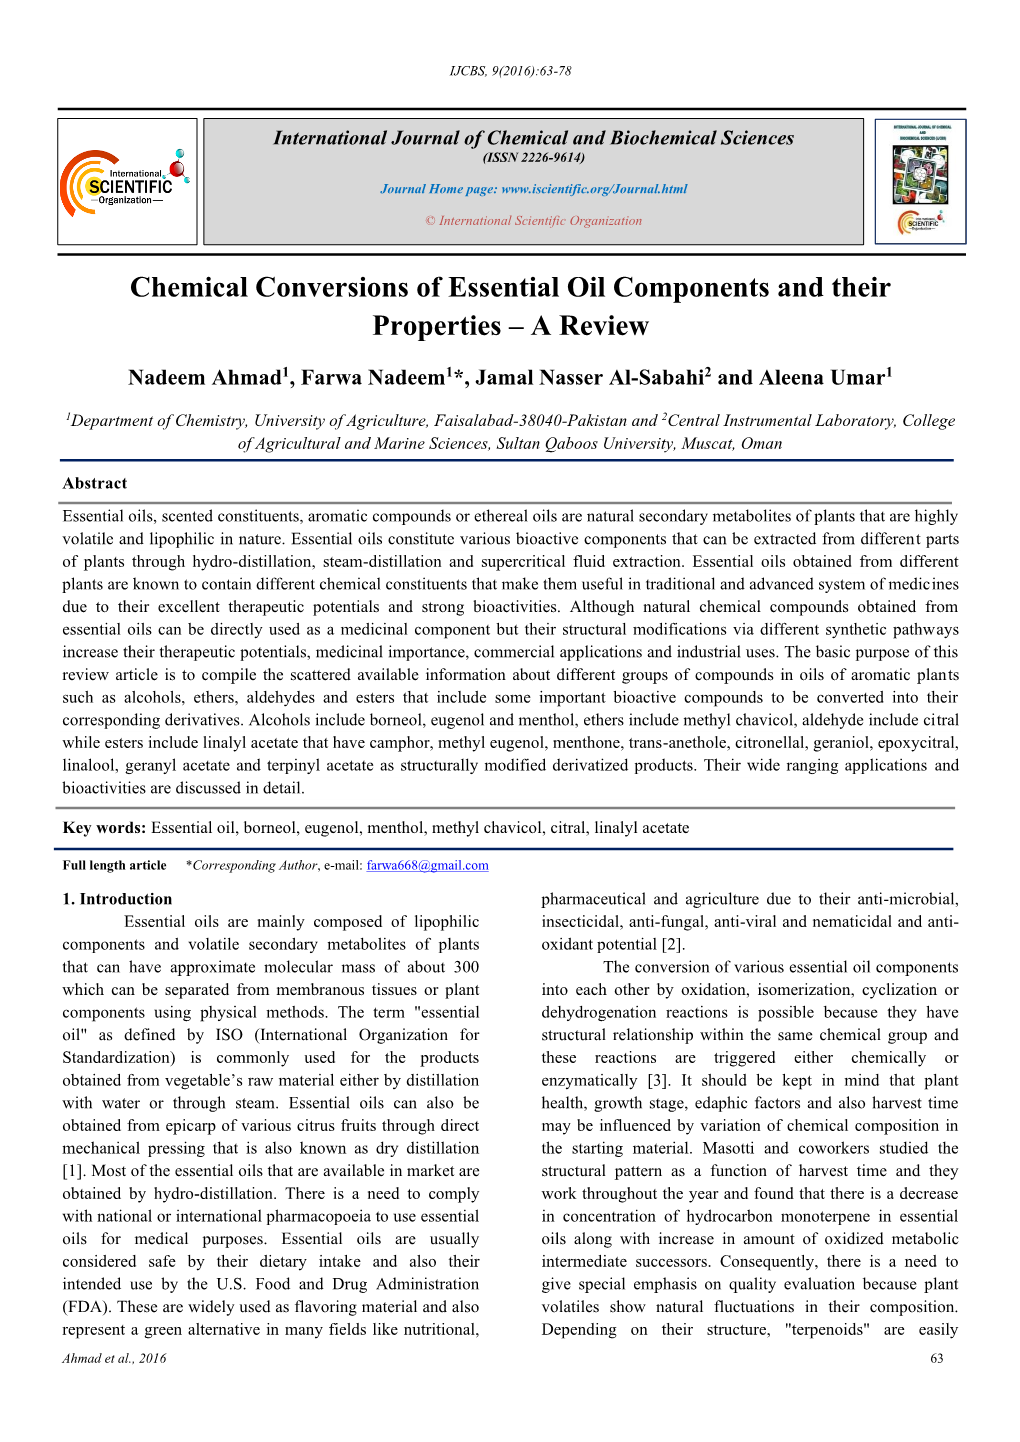 Chemical Conversions of Essential Oil Components and Their Properties – a Review